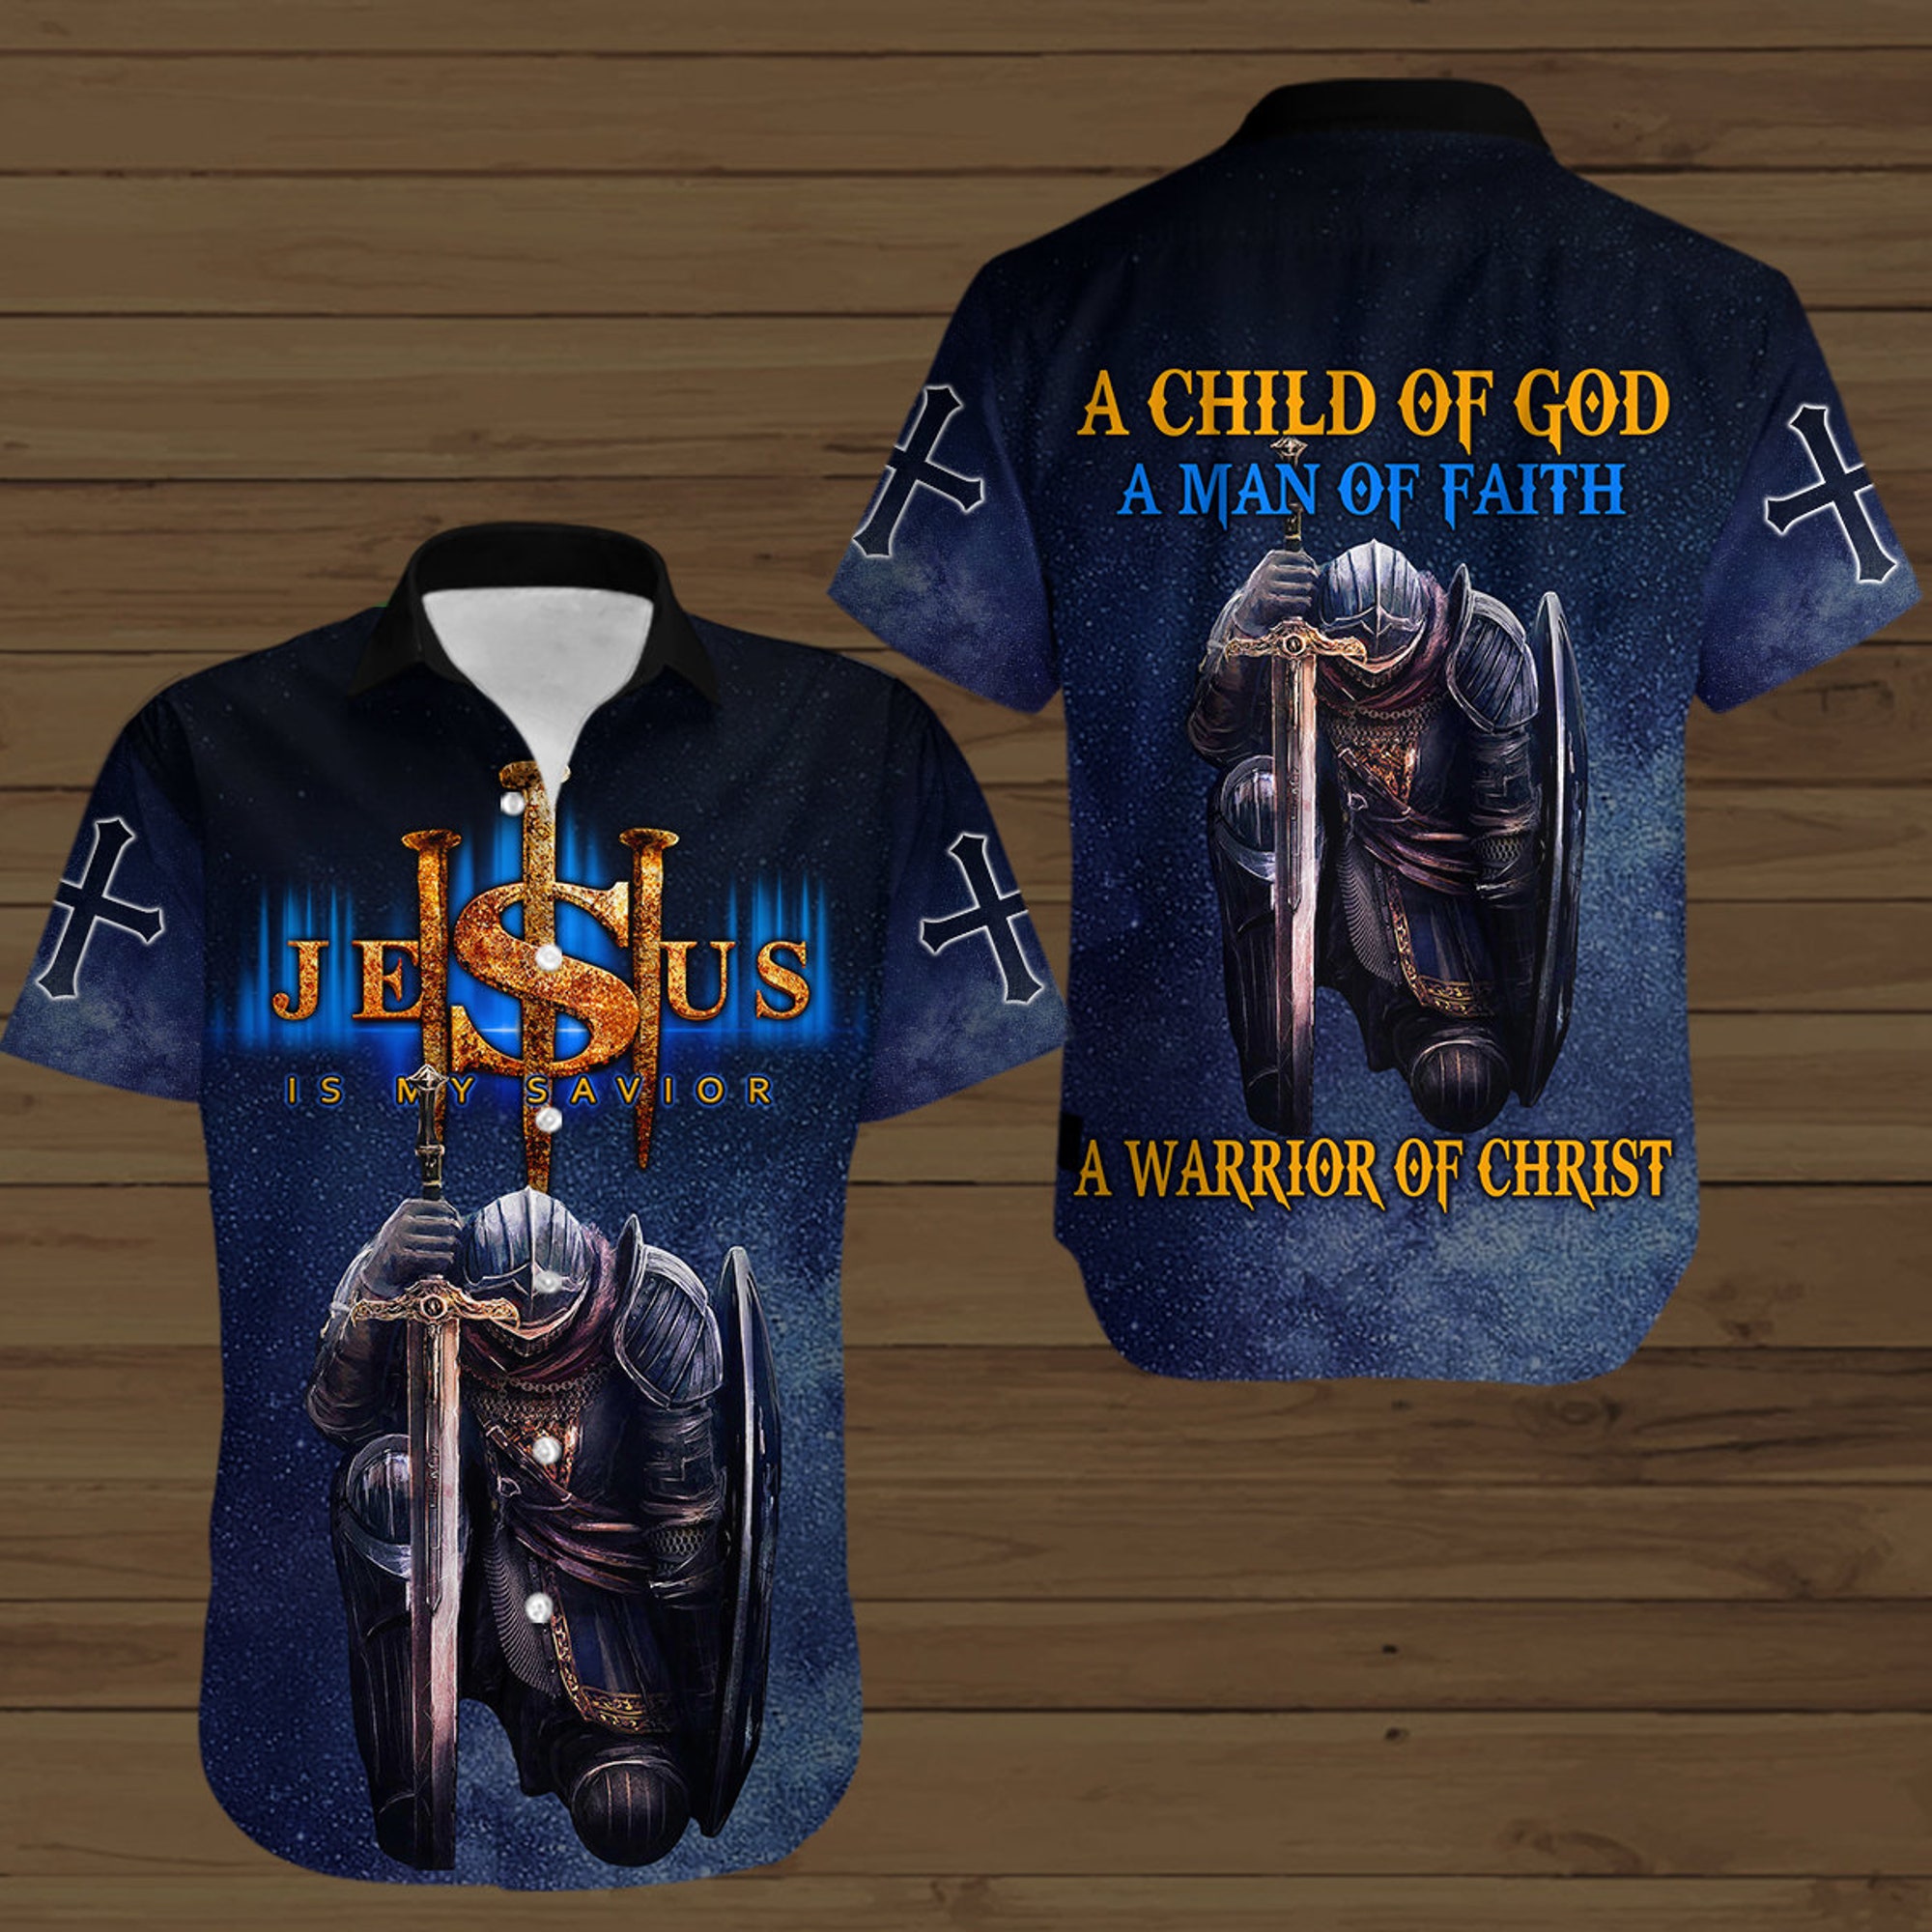 Discover Jesus Is My Savior A Child Of God A Man Of Faith A Warrior Of Christ Hawaii Style Shirt